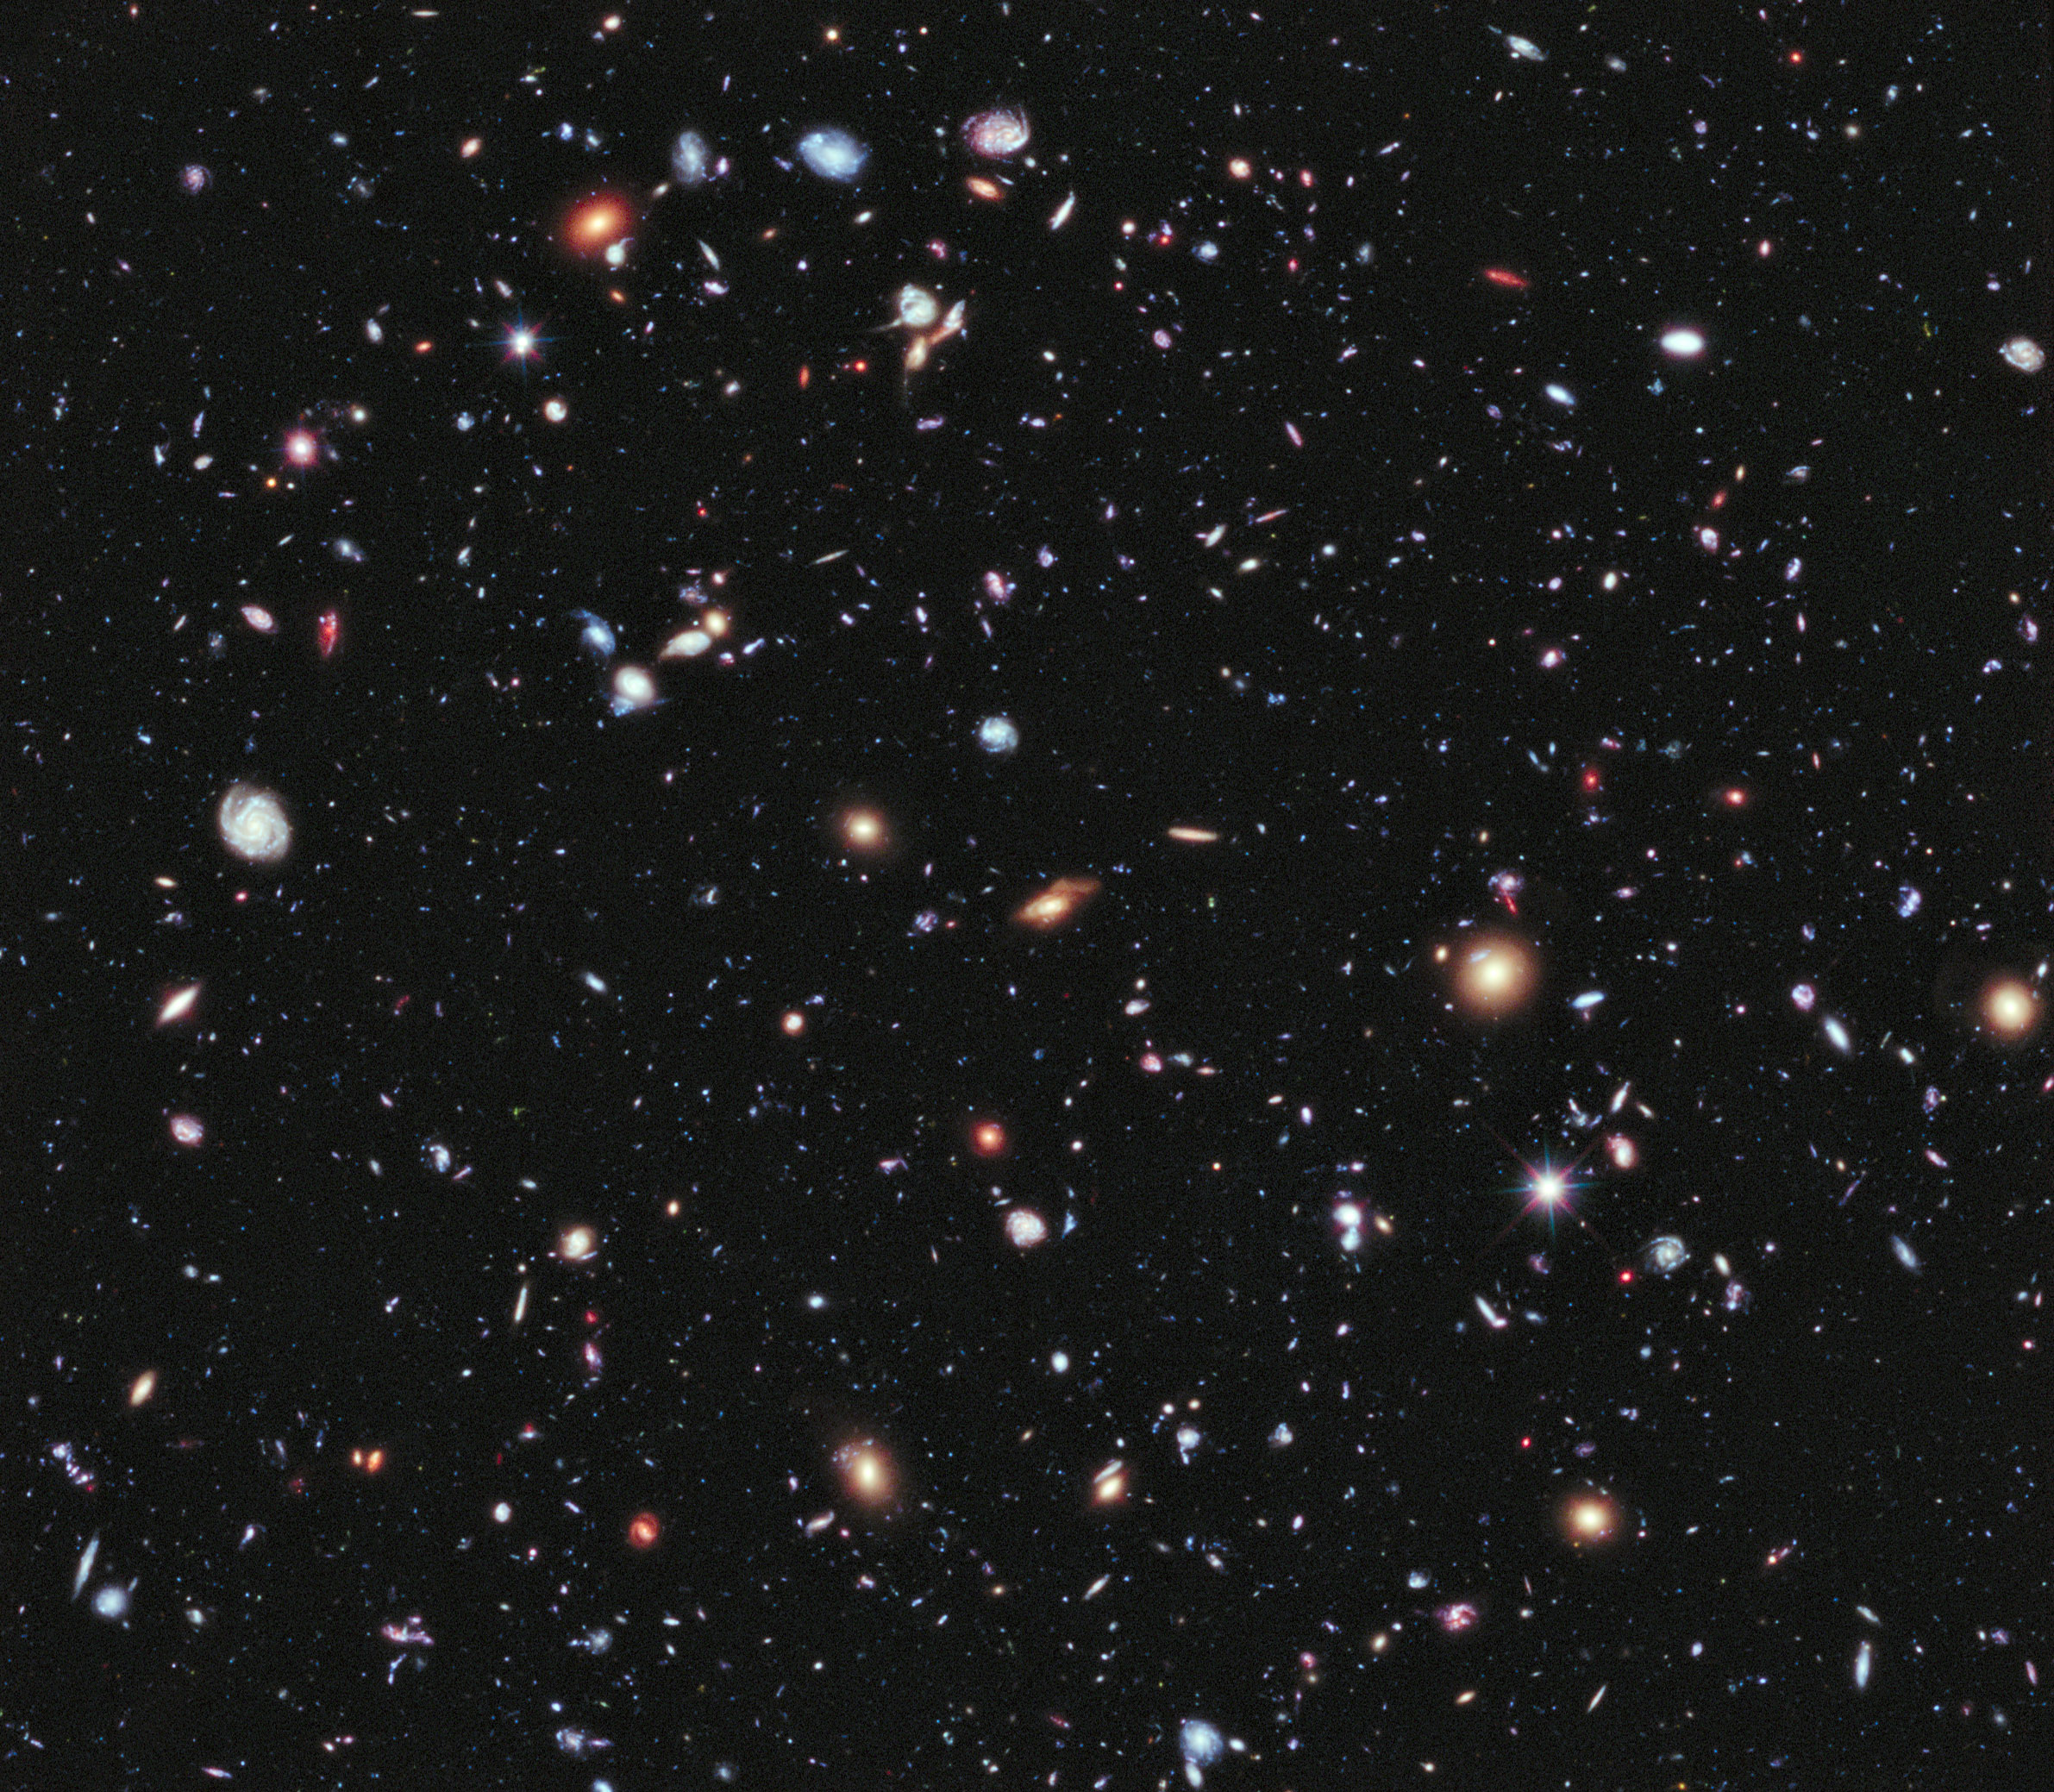 The Hubble Ultra Deep Field is an image of a small area of space in the constellation Fornax, created using Hubble Space Telescope data from 2003-04.